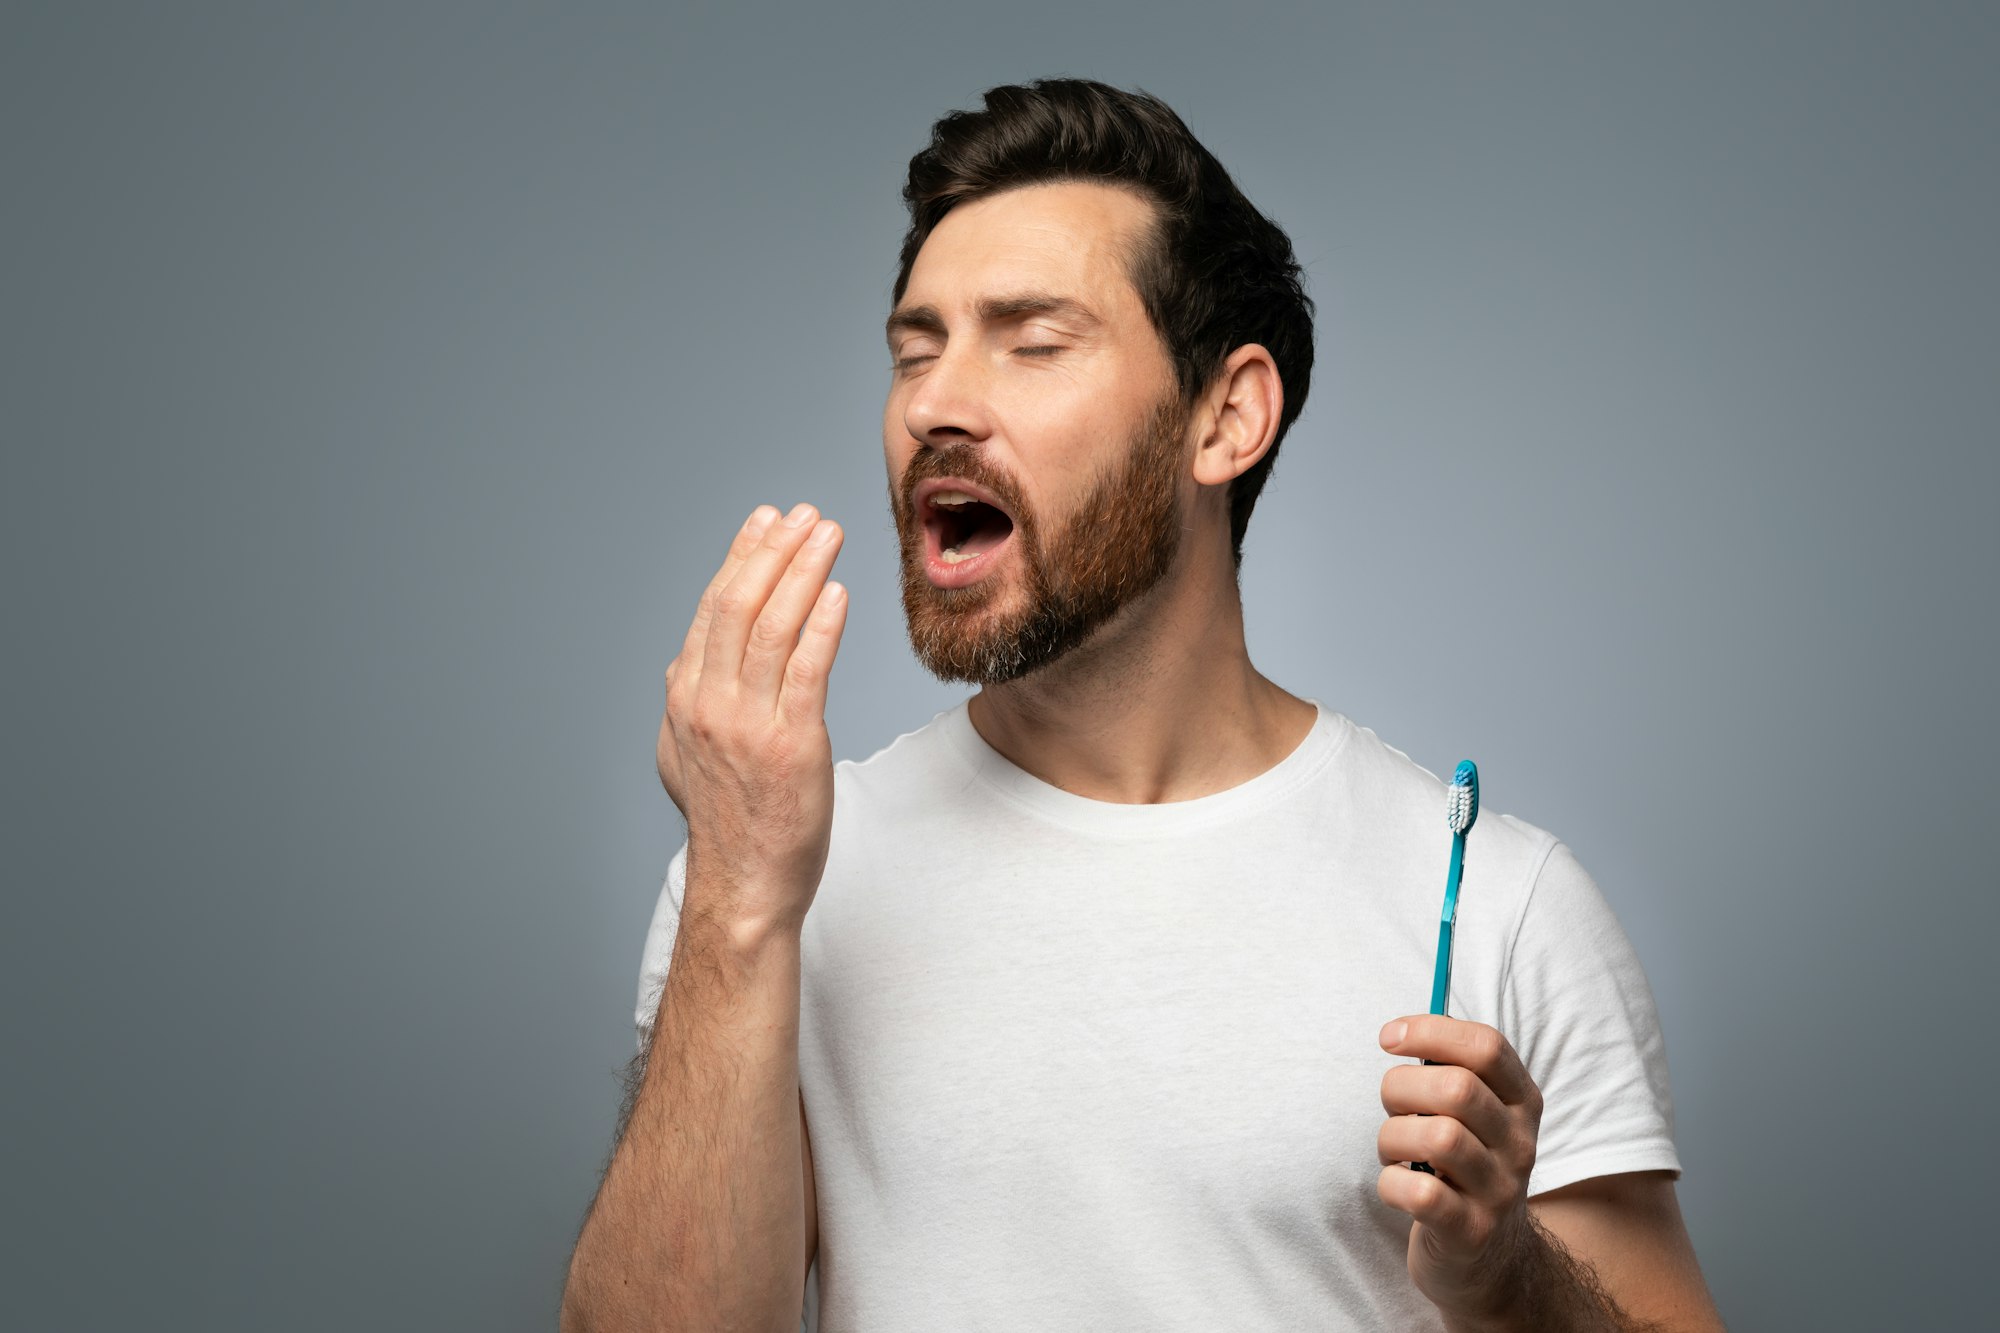 Man checking his breath, representing the concern and treatment for Bad Breath at Schlueter Periodontics.